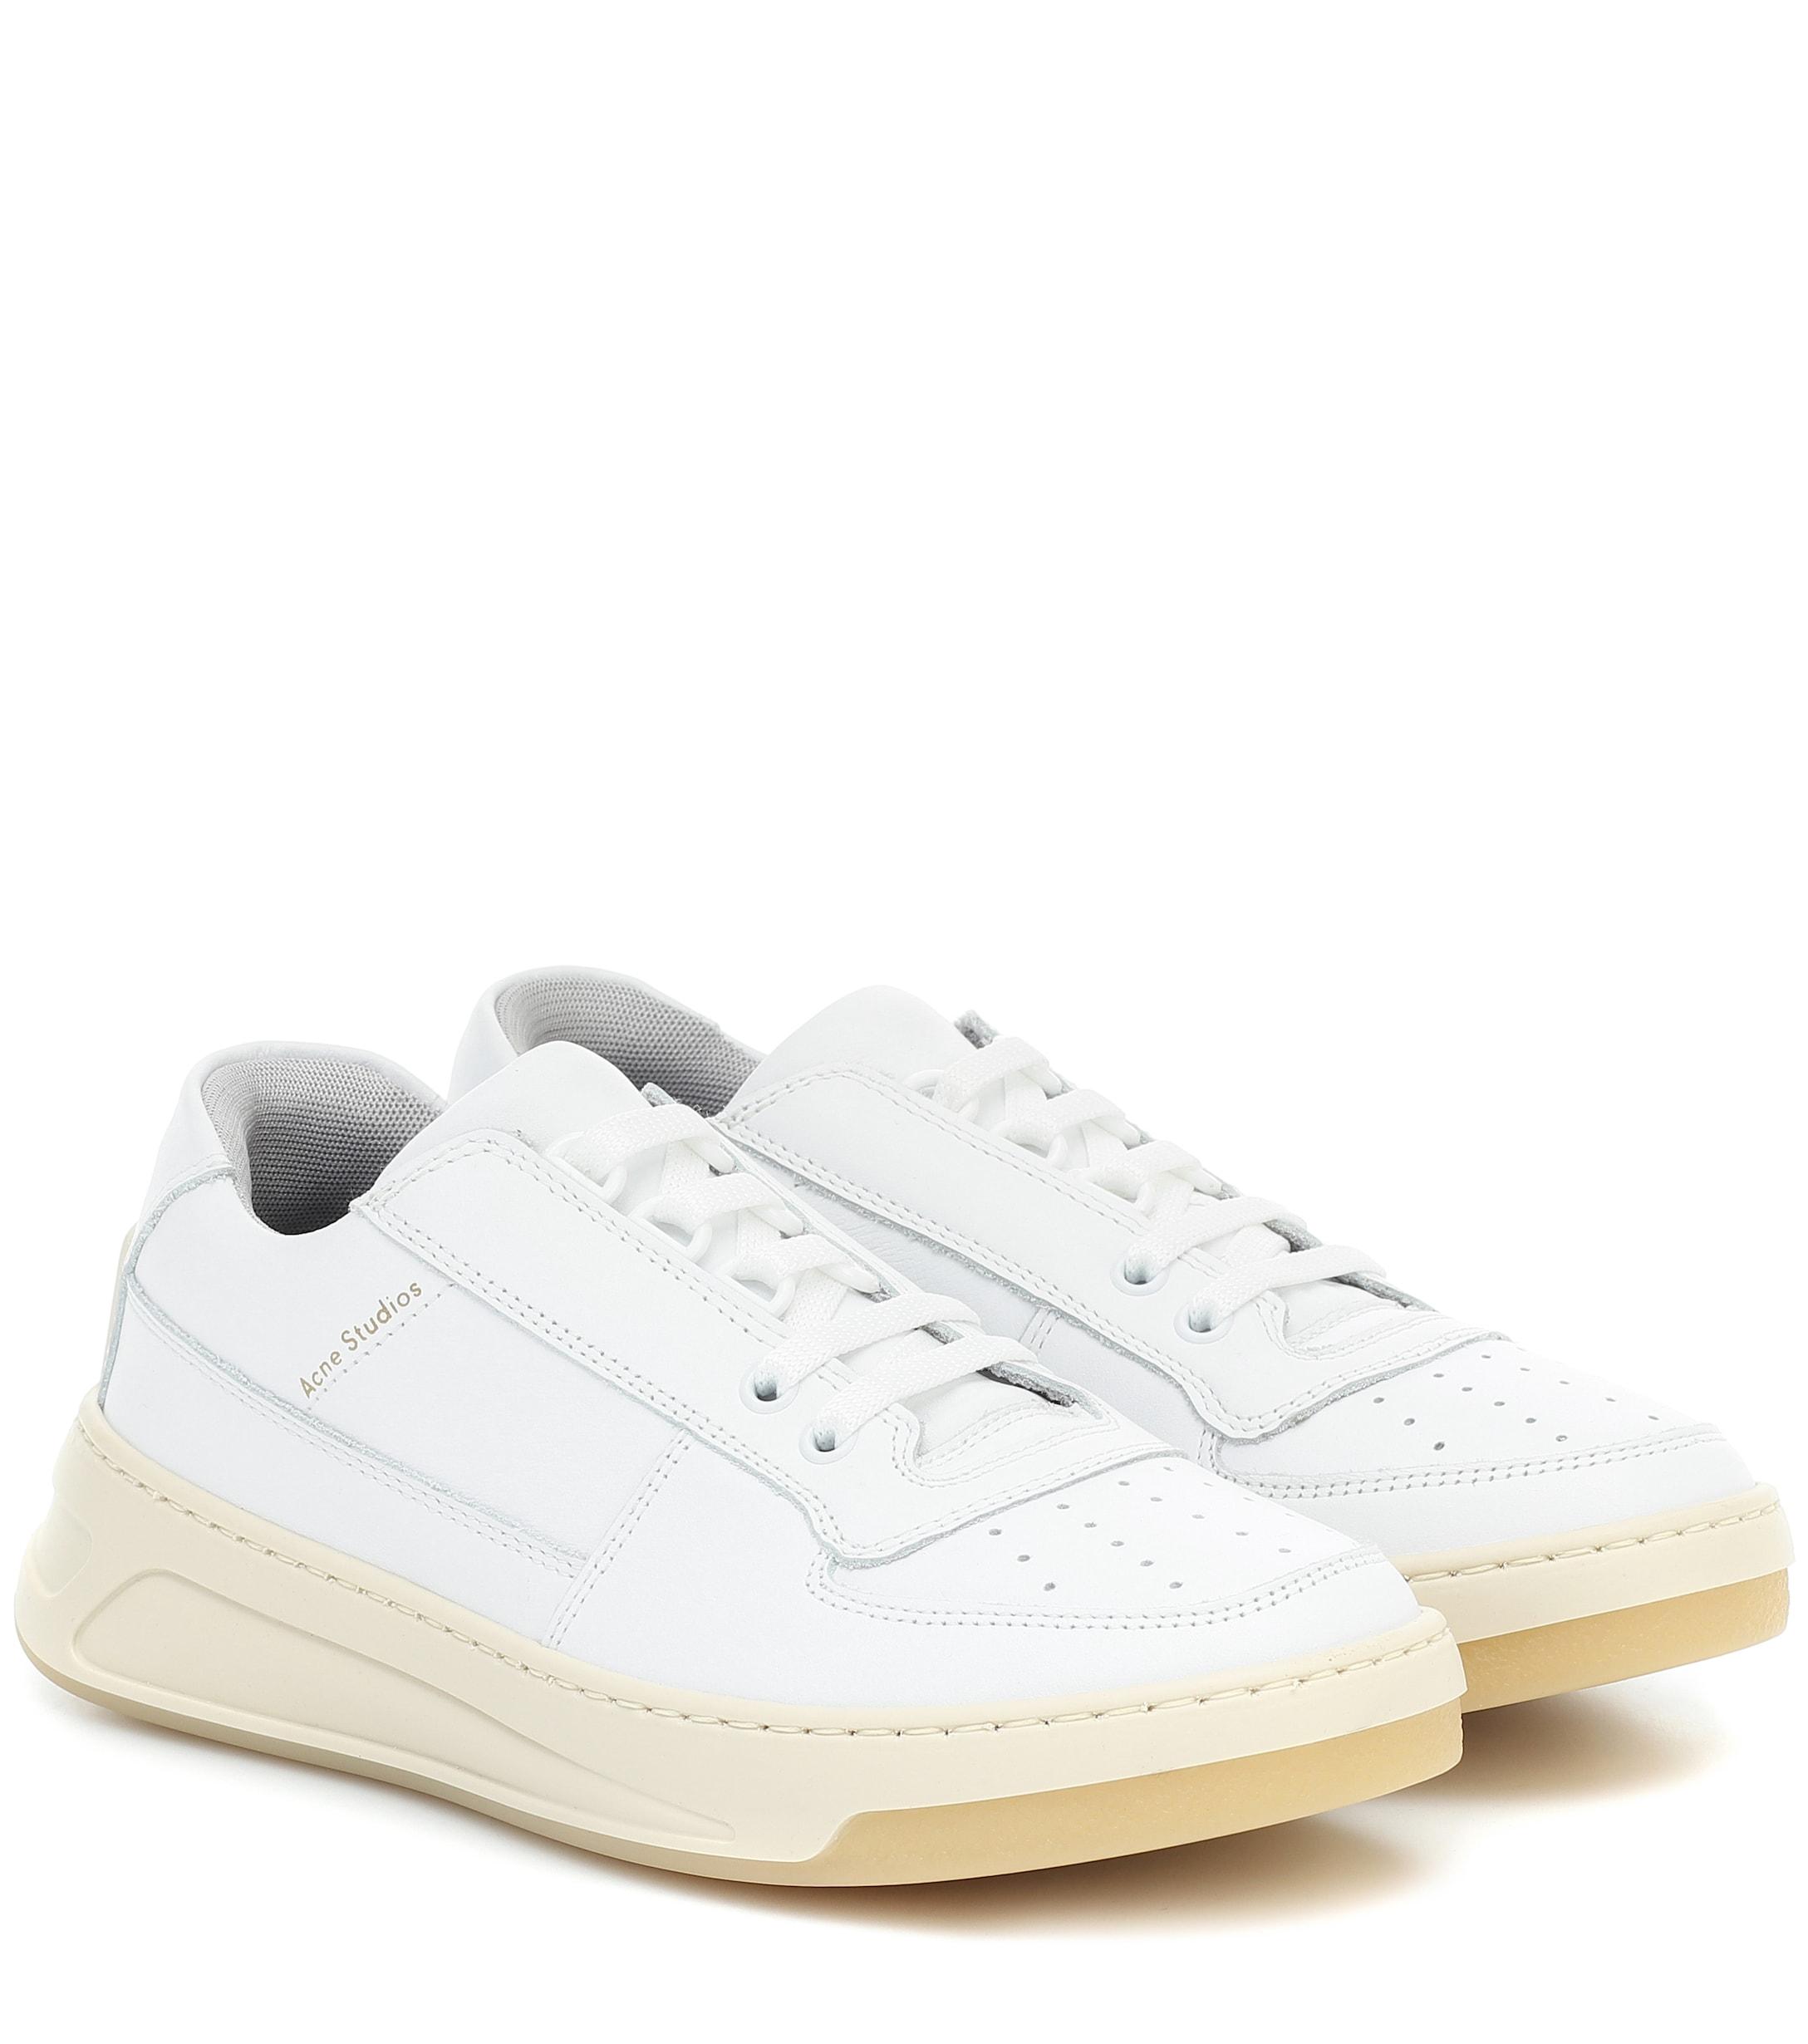 Acne Studios Steffey White Leather Sneakers - Save 24% - Lyst